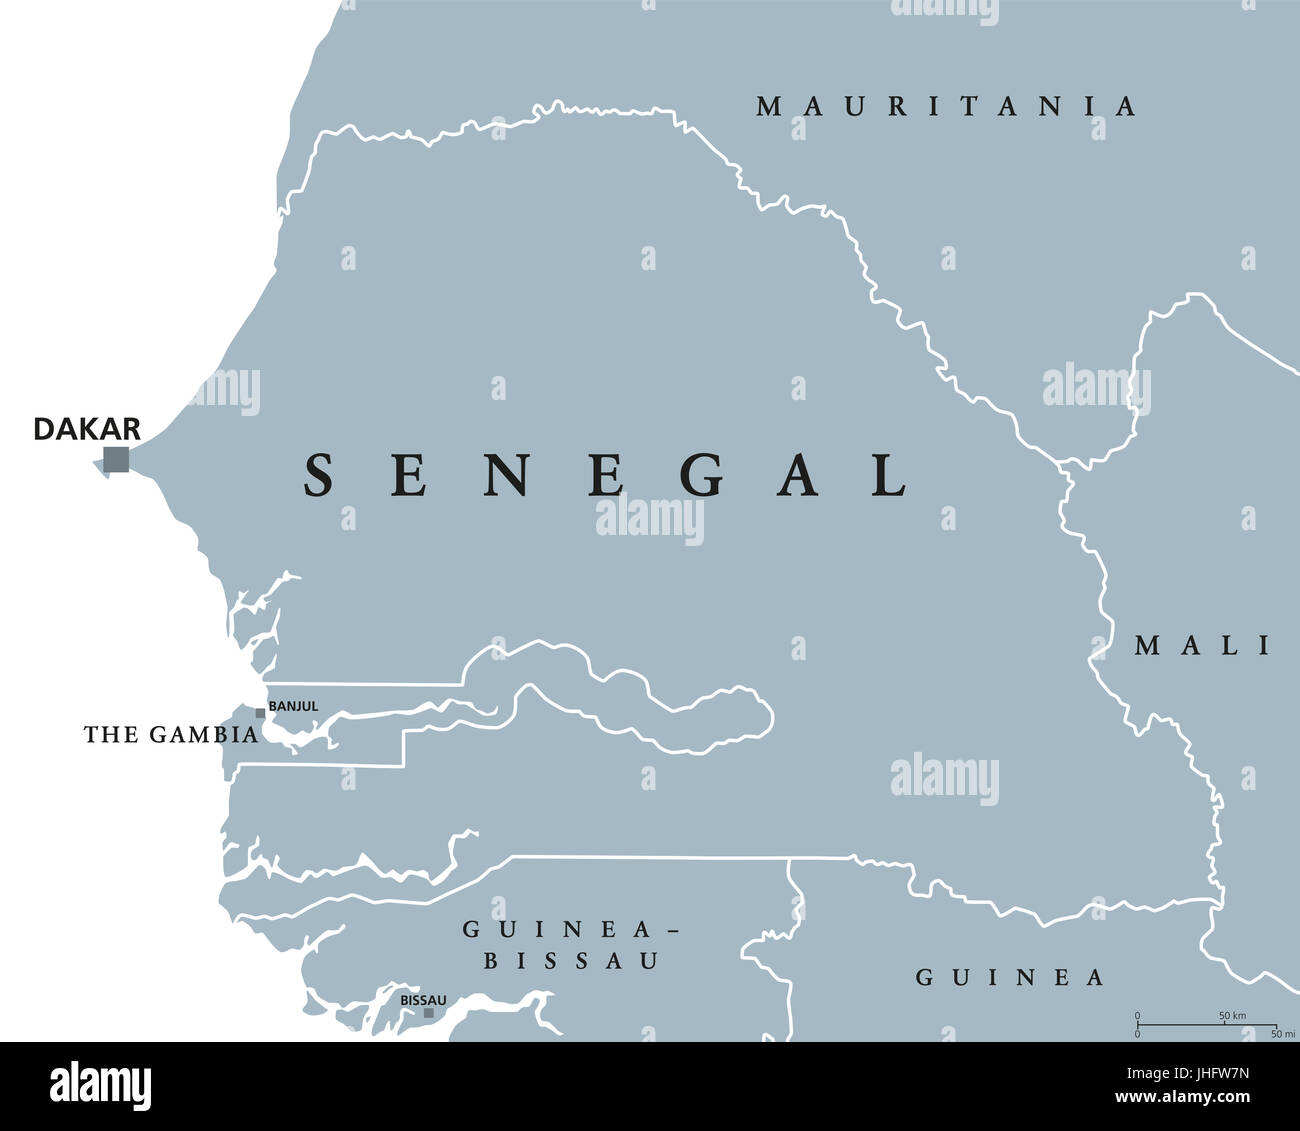 Senegal political map with capital Dakar, international borders and neighbors. Republic and country in West Africa. Gray illustration. Stock Photo